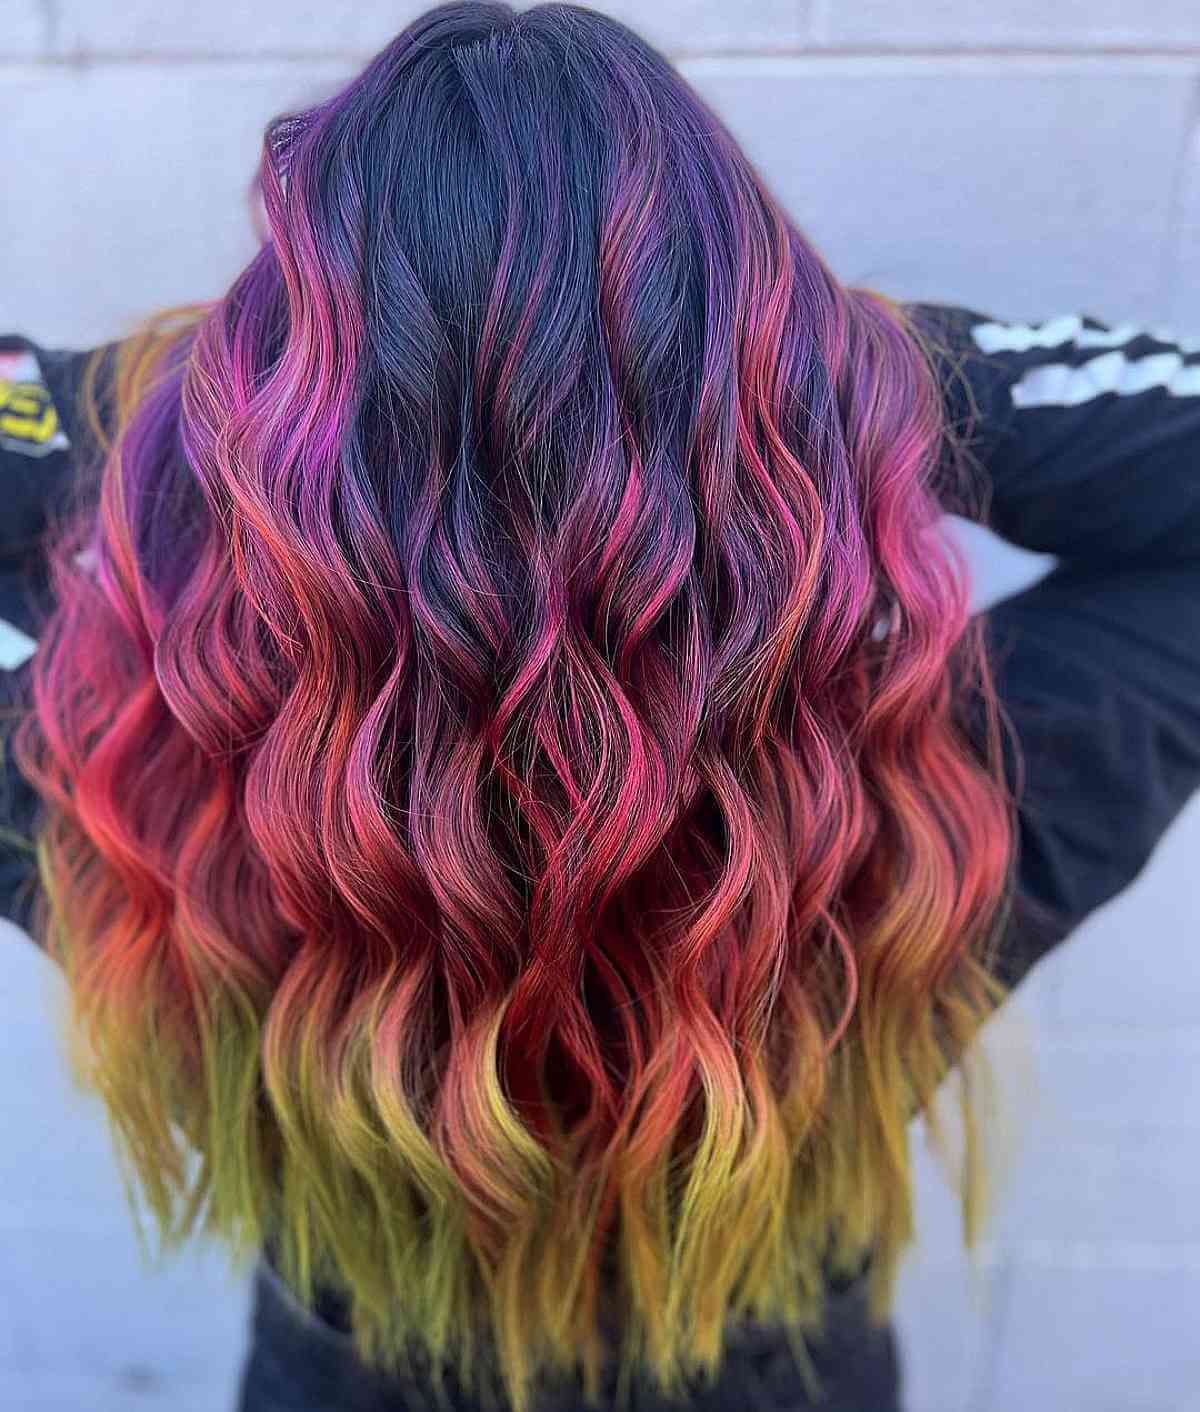 Black to Red-Orange and Yellow Hair Color